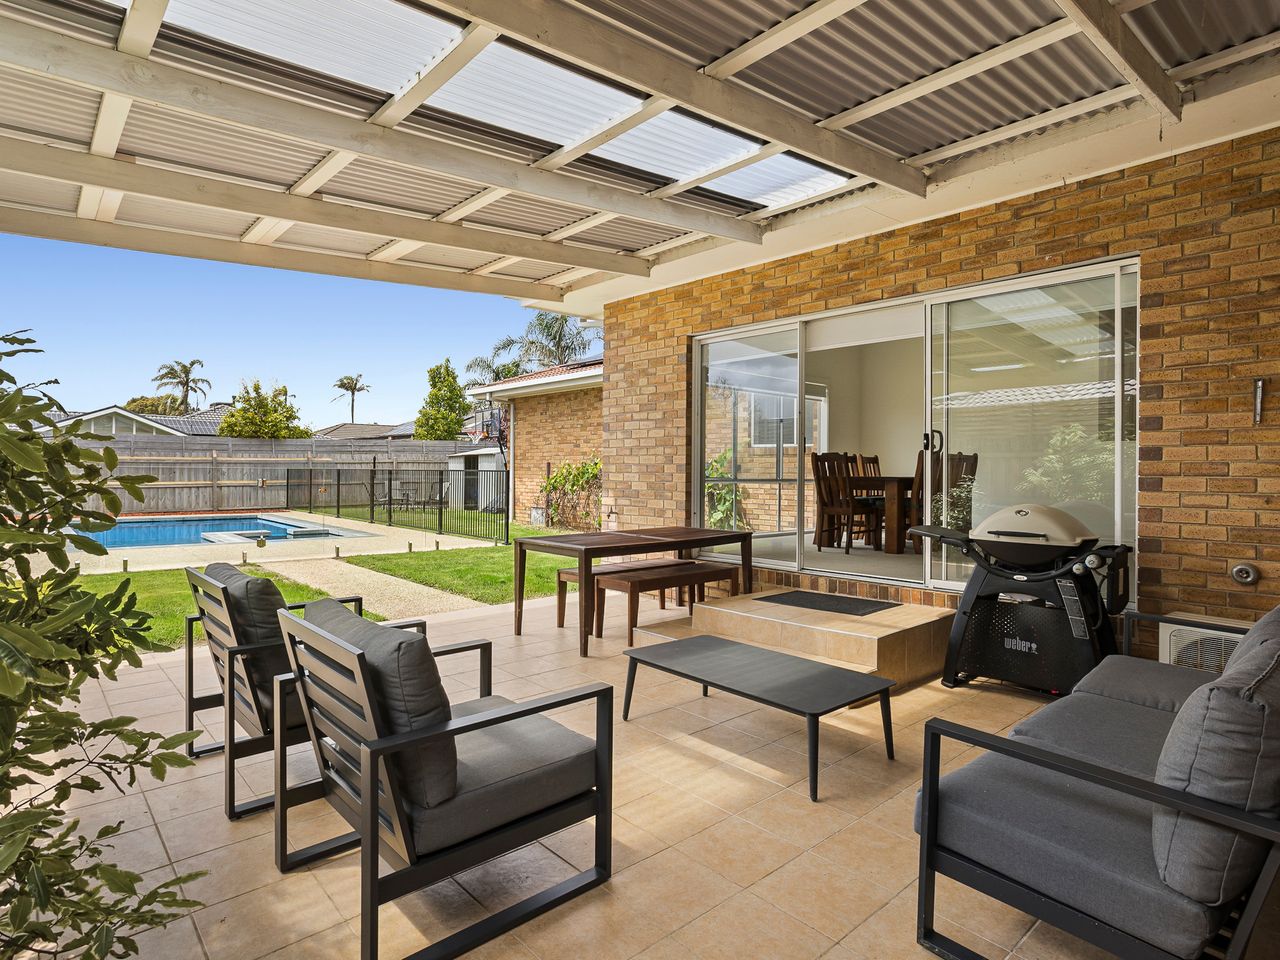 Property Image 2 - Nelly’s Nook - Swimming pool and spa